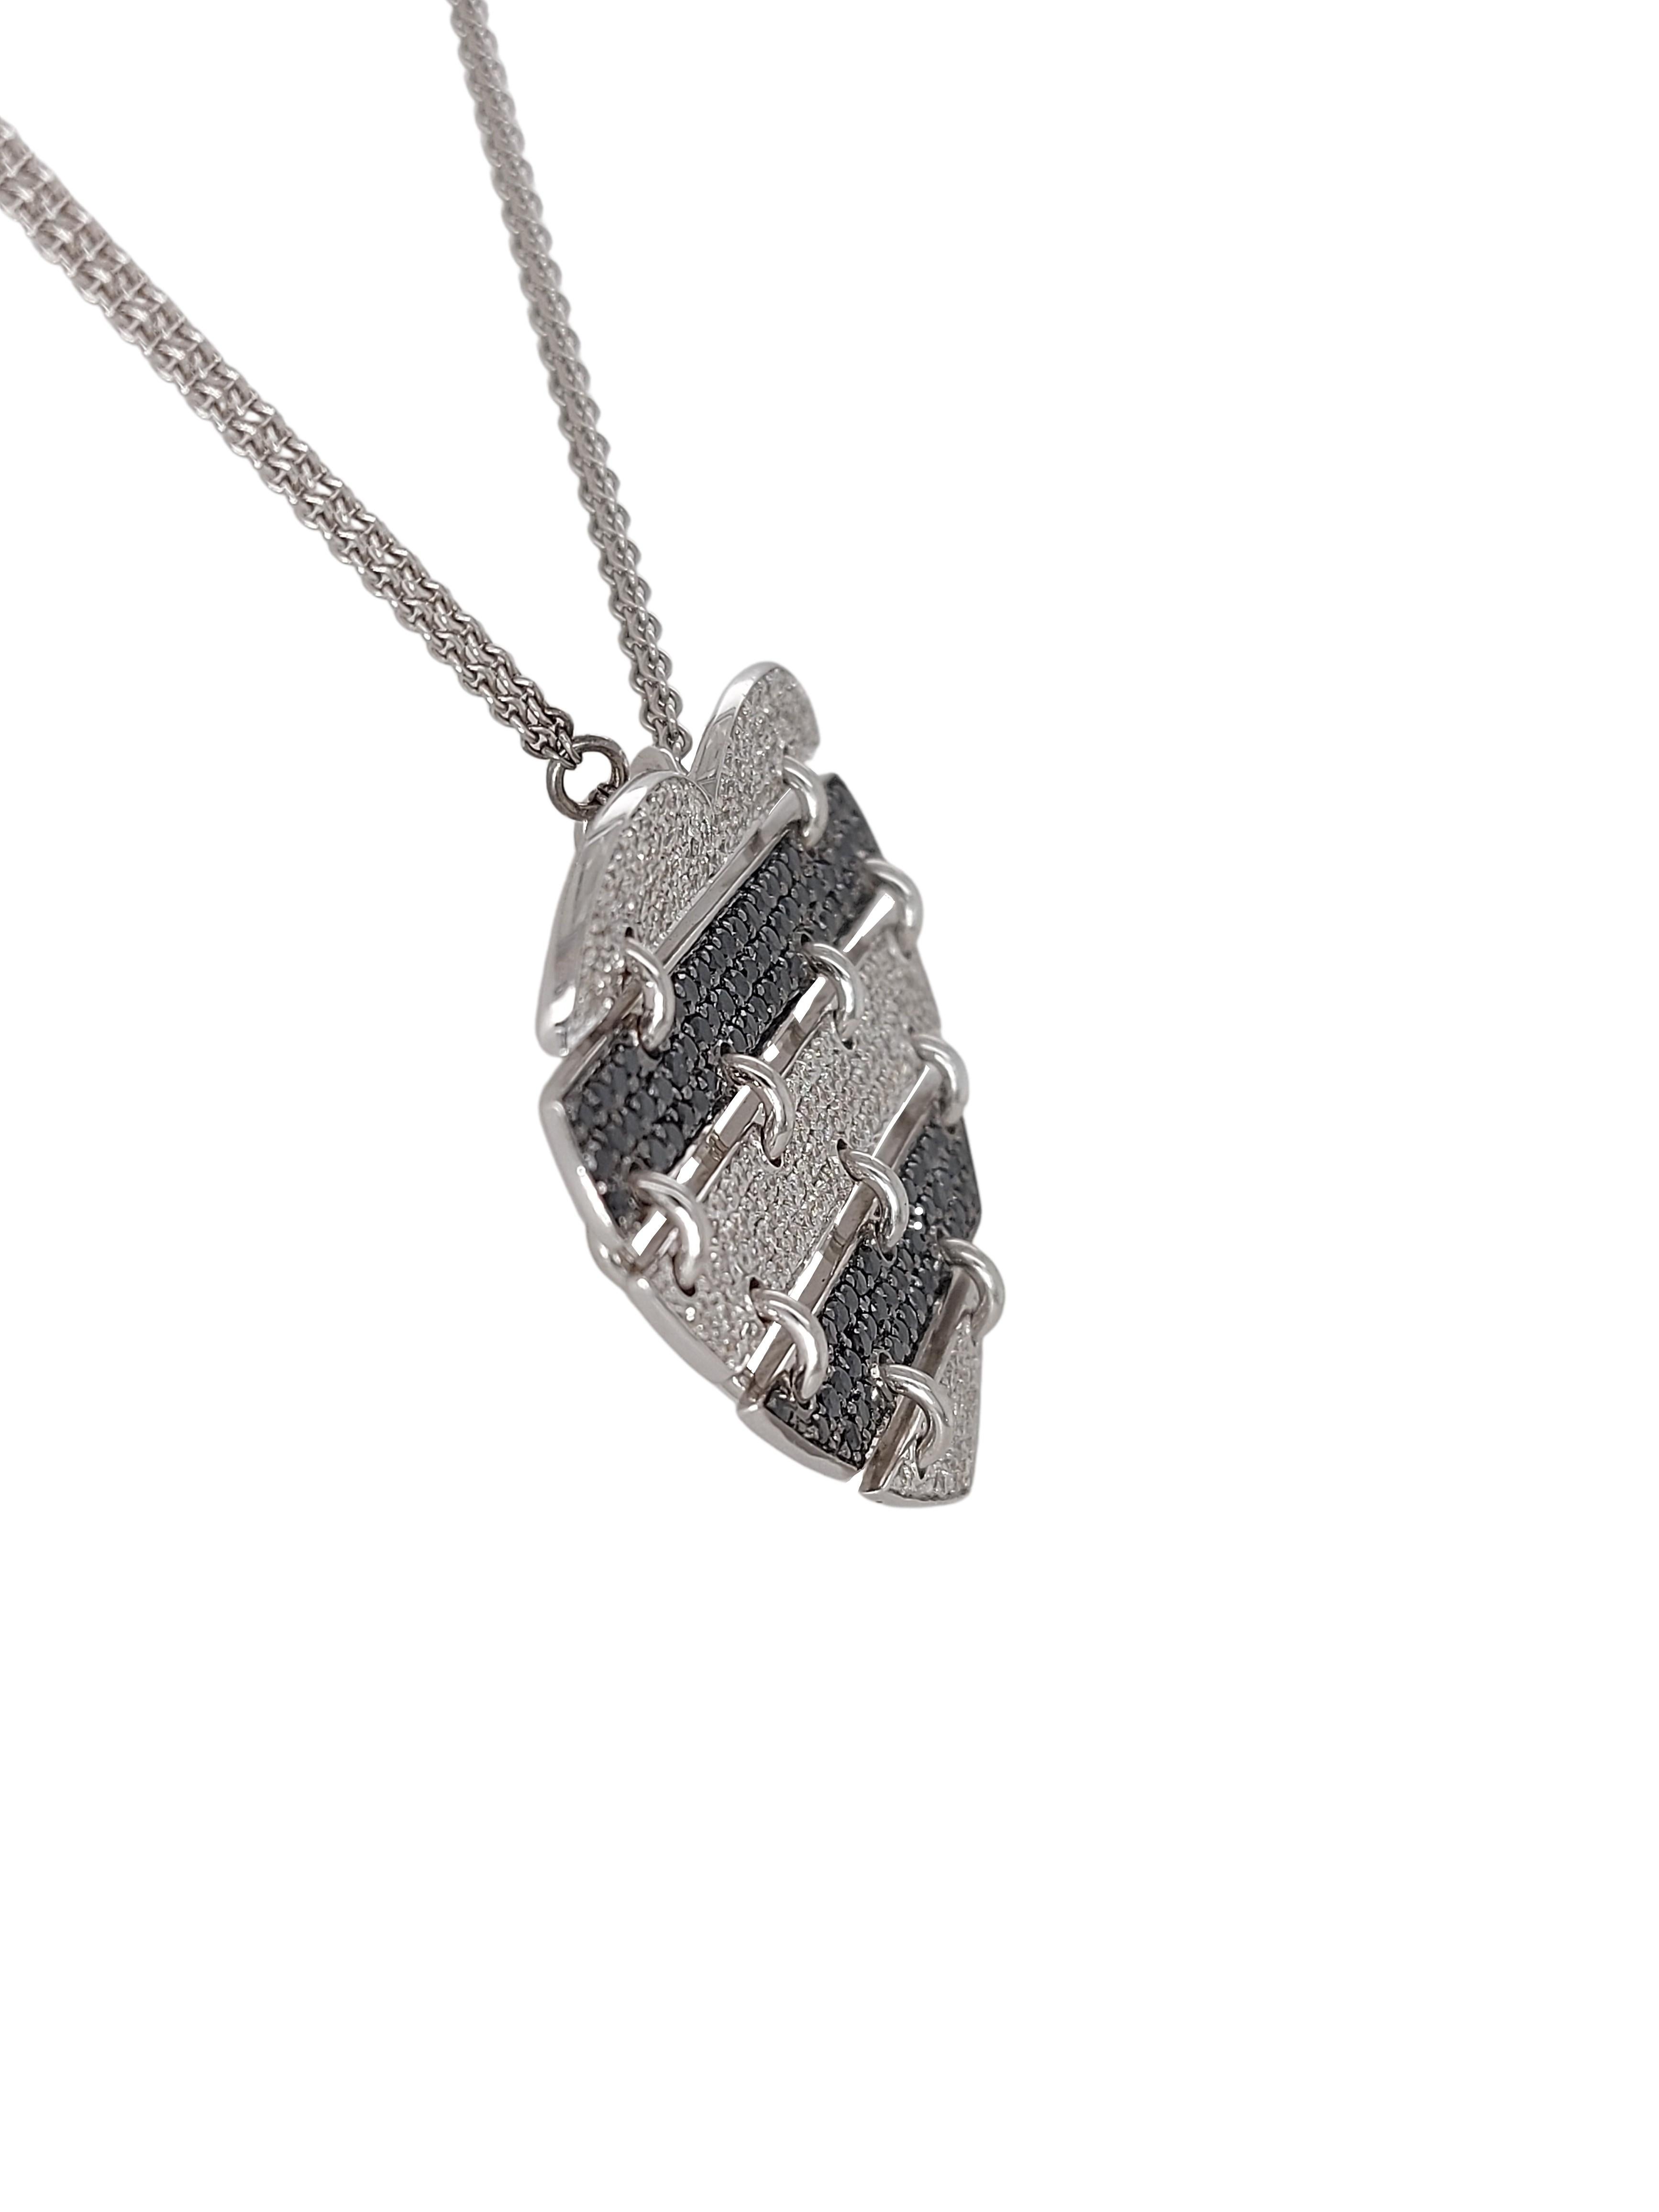 Artisan Stunning Moving 18kt White Gold Necklace with 2.5ct Black and White Diamonds For Sale